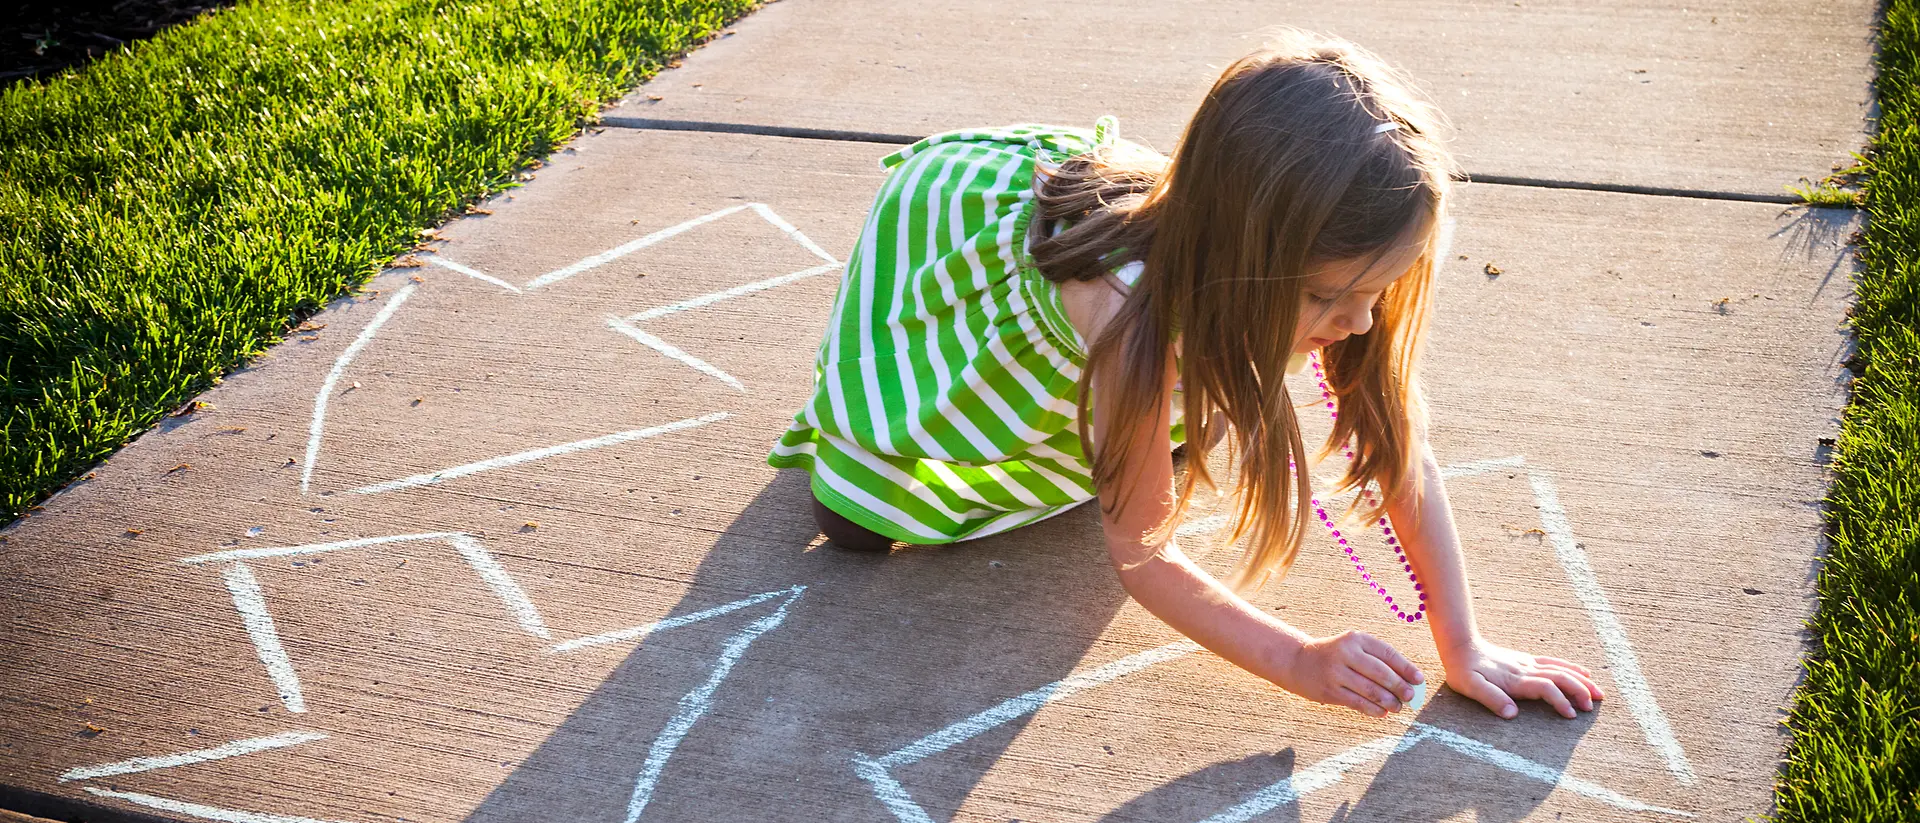 girl in green-white dress painting arrows on a way with chalk